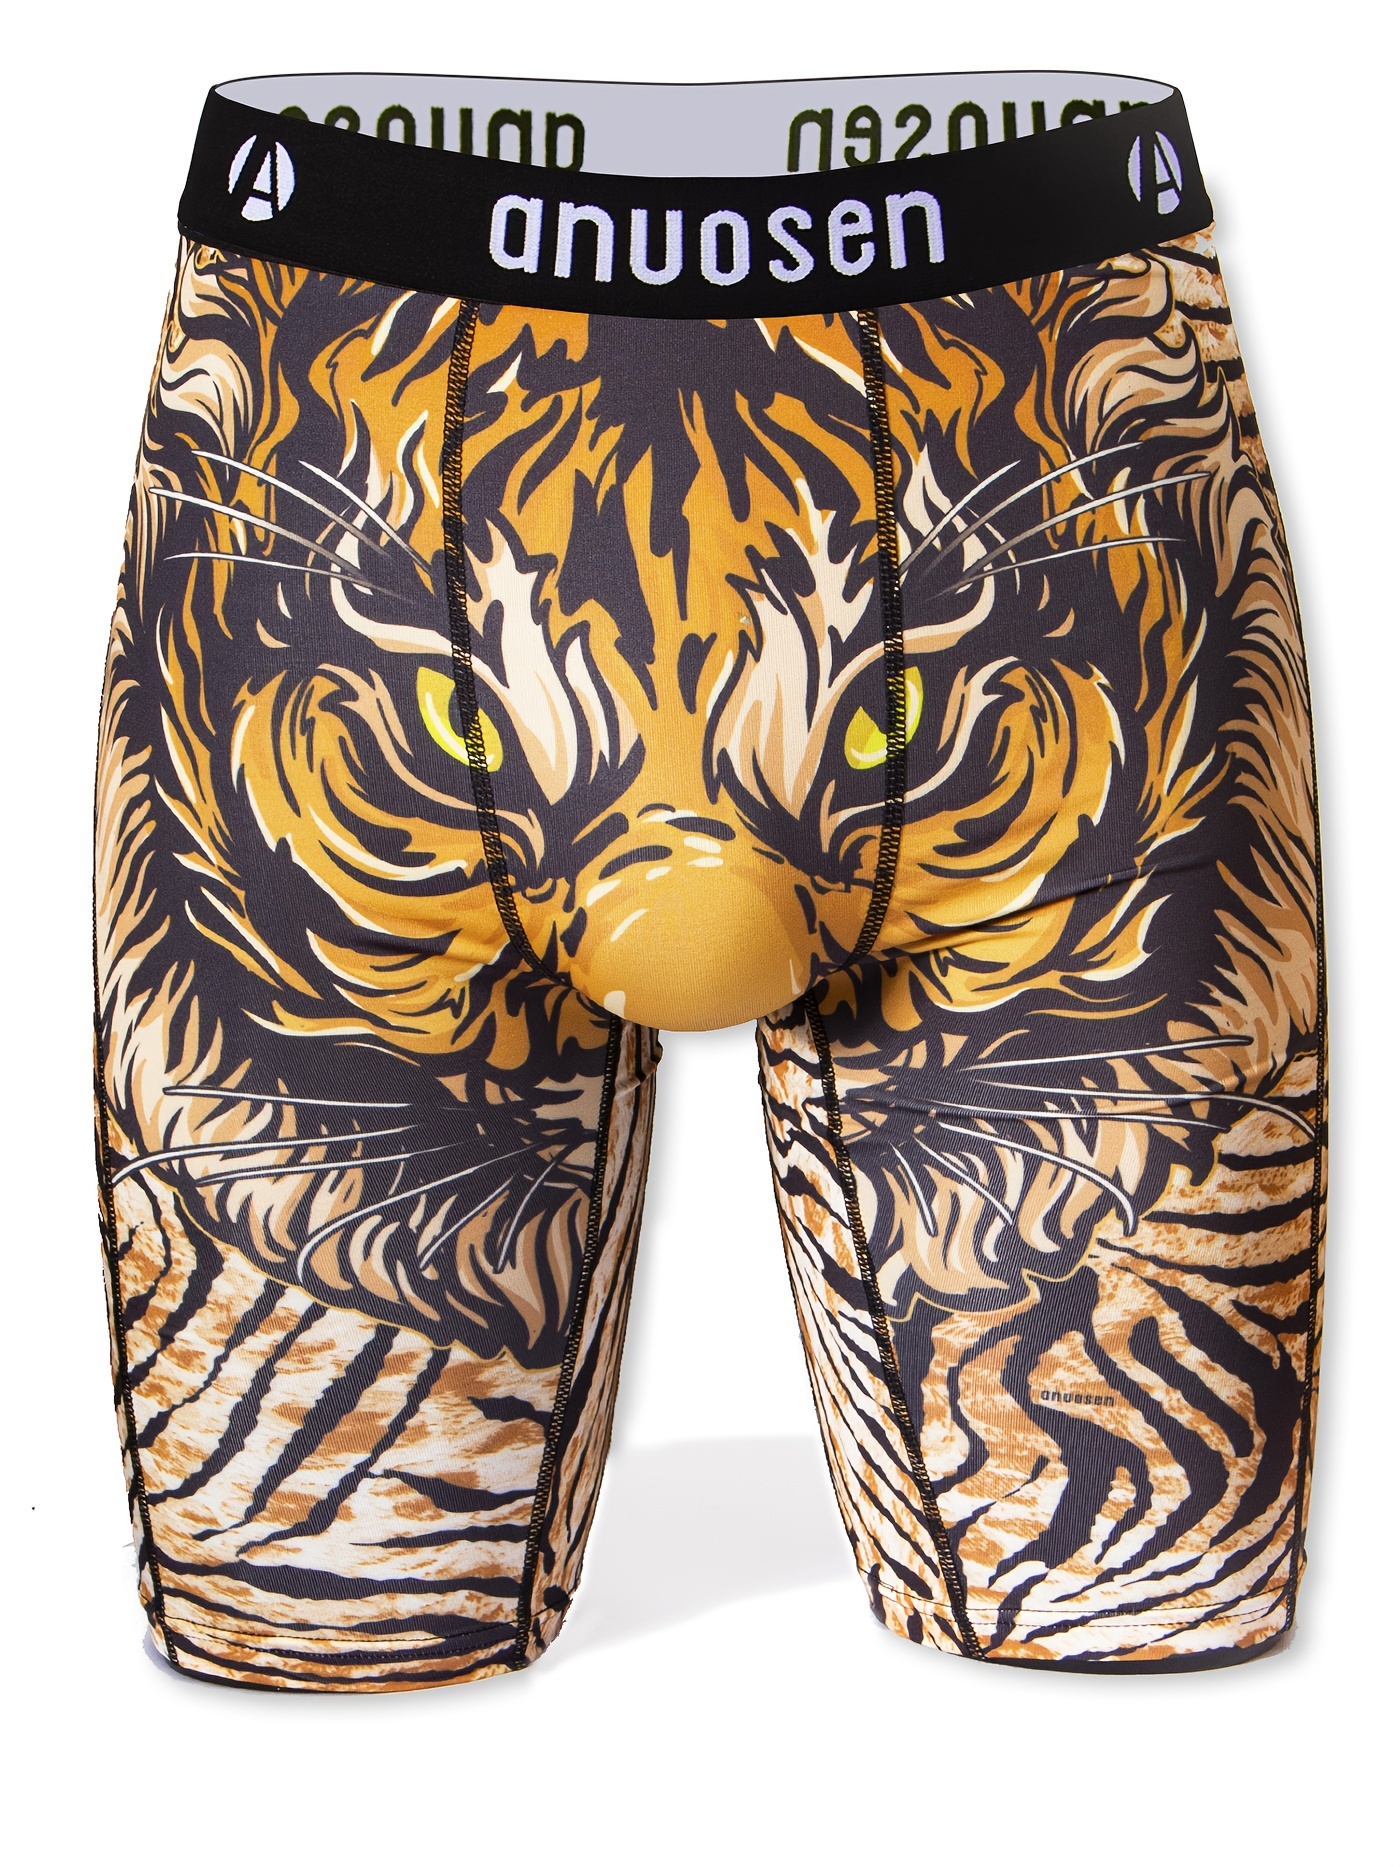 Lucky Tiger Underwear for Women Short Pants Women Girl Panties Funny Print  for Women Cotton Underwear Comfortable Shorts Pant